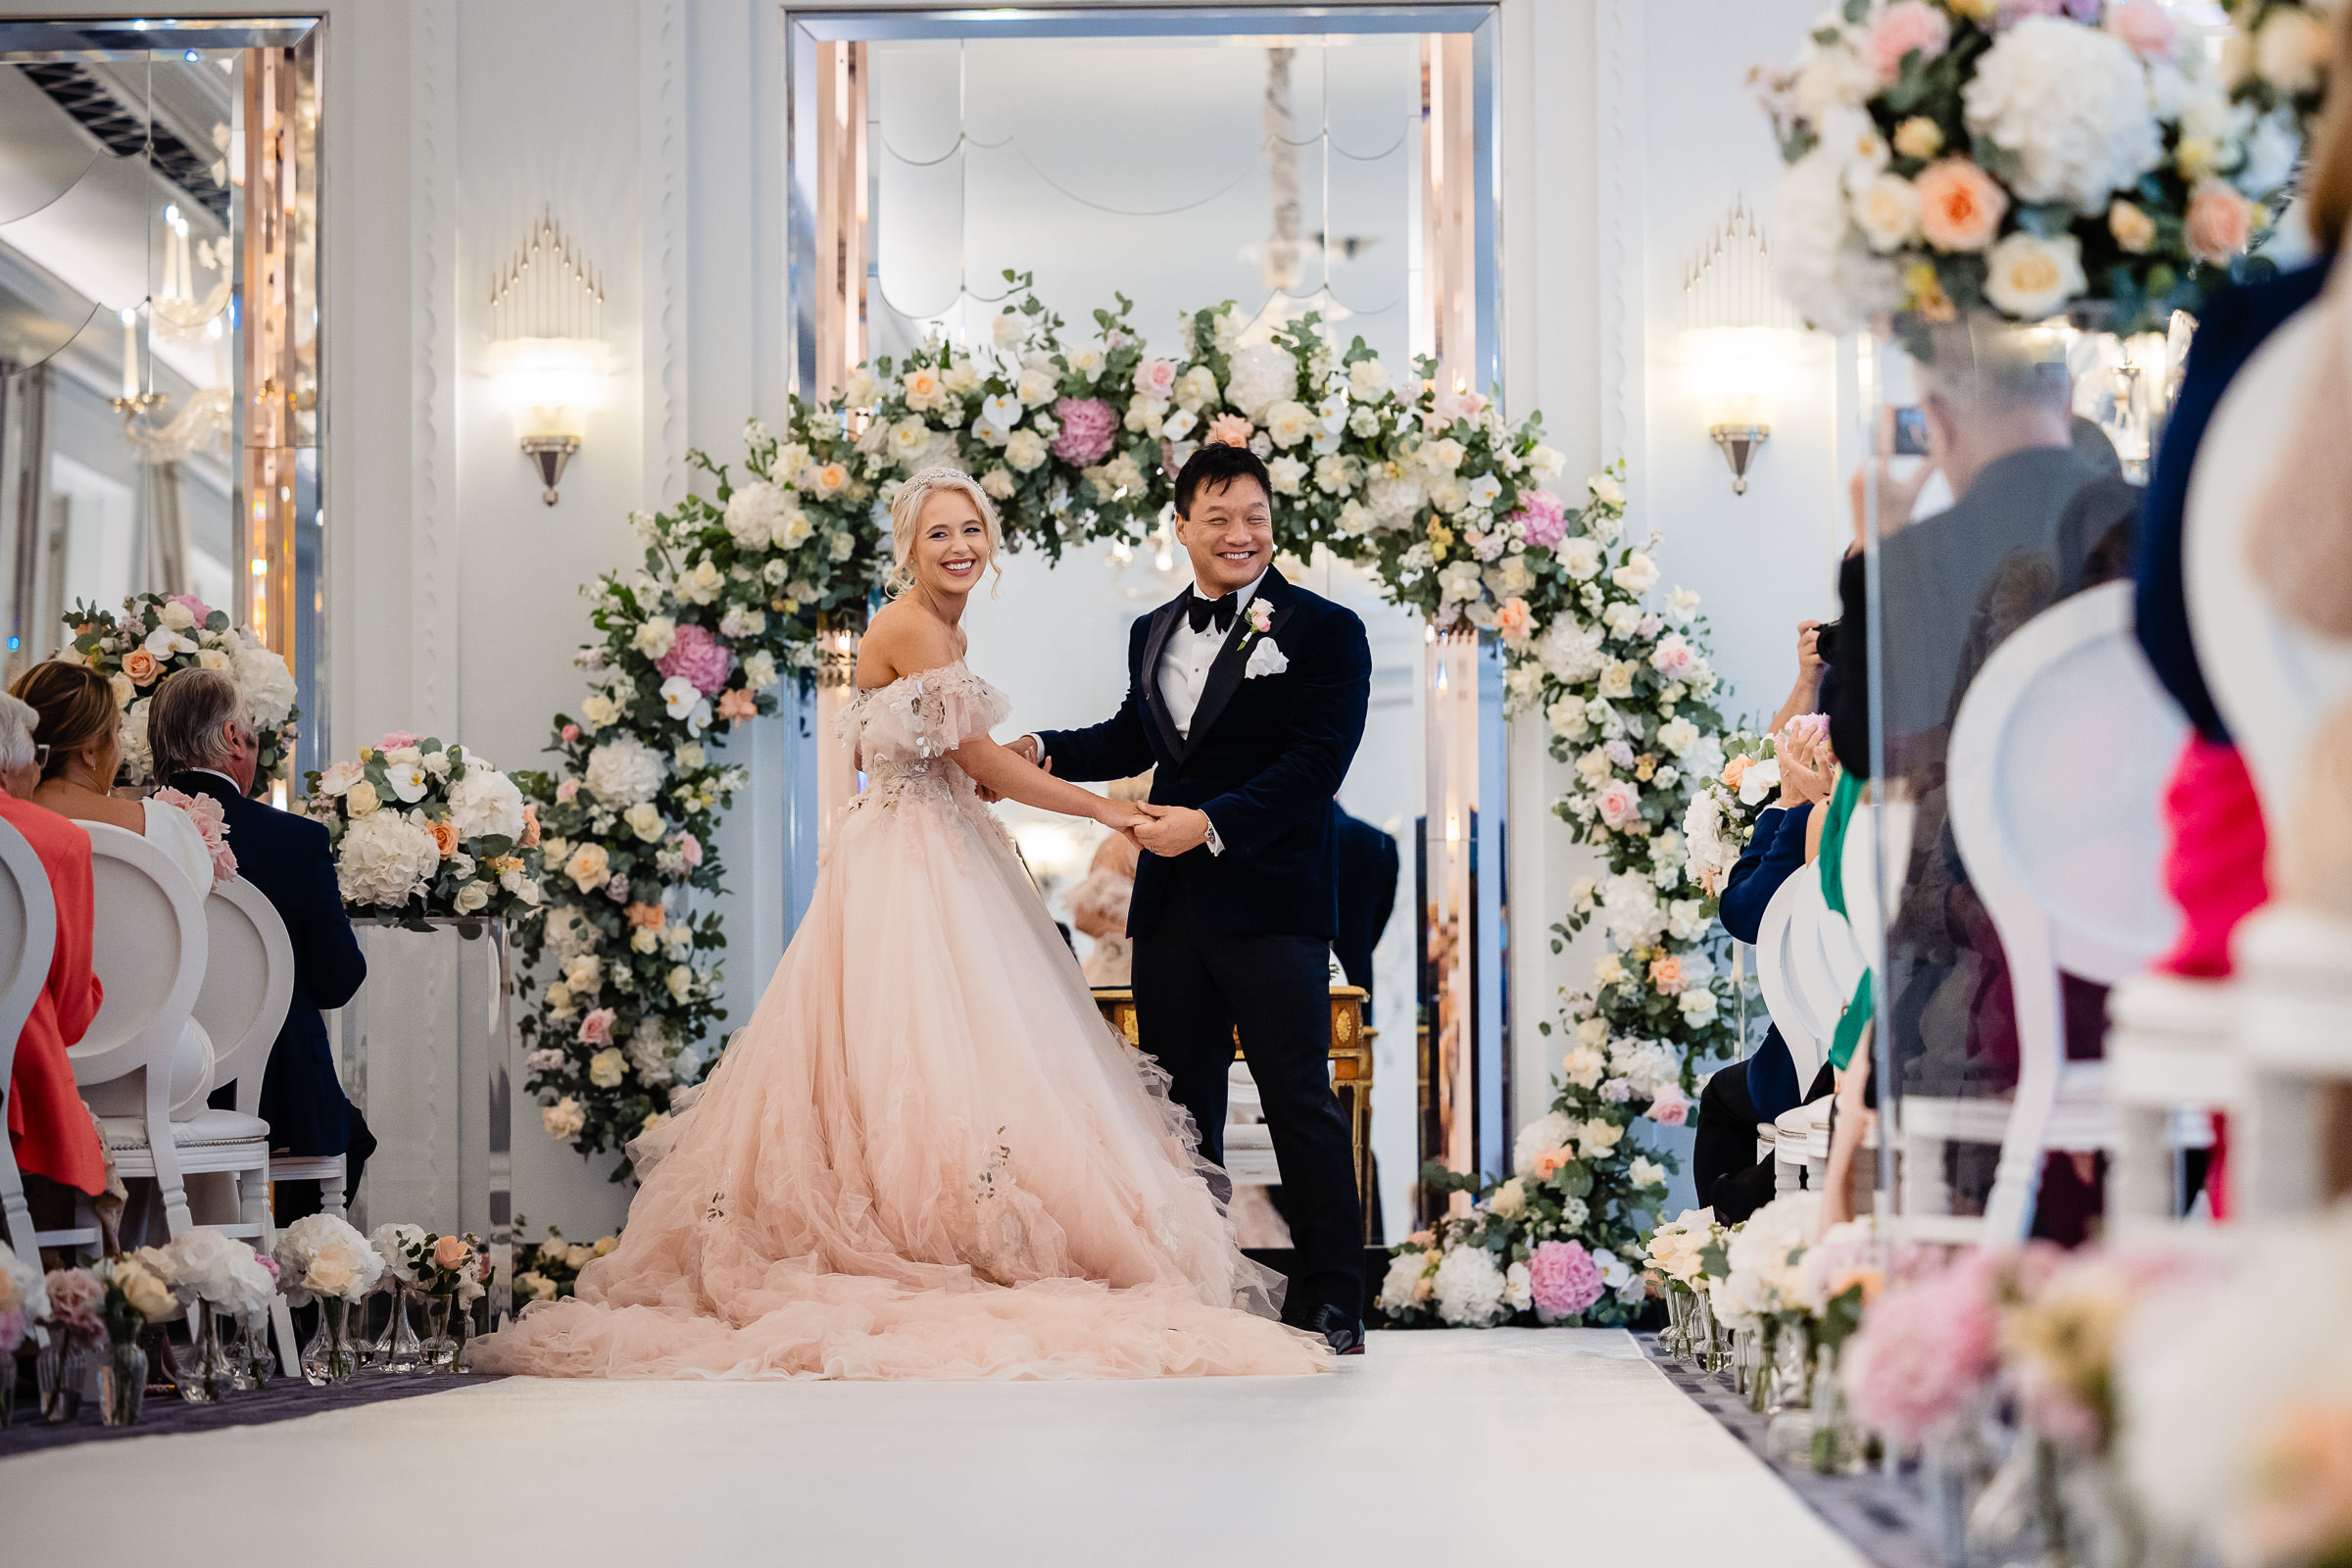 Photograph by Beautifullight UK photography of laughing bride wearing a pink dress & a laughing groom holding hands during their wedding ceremony at Claridges Hotel, London